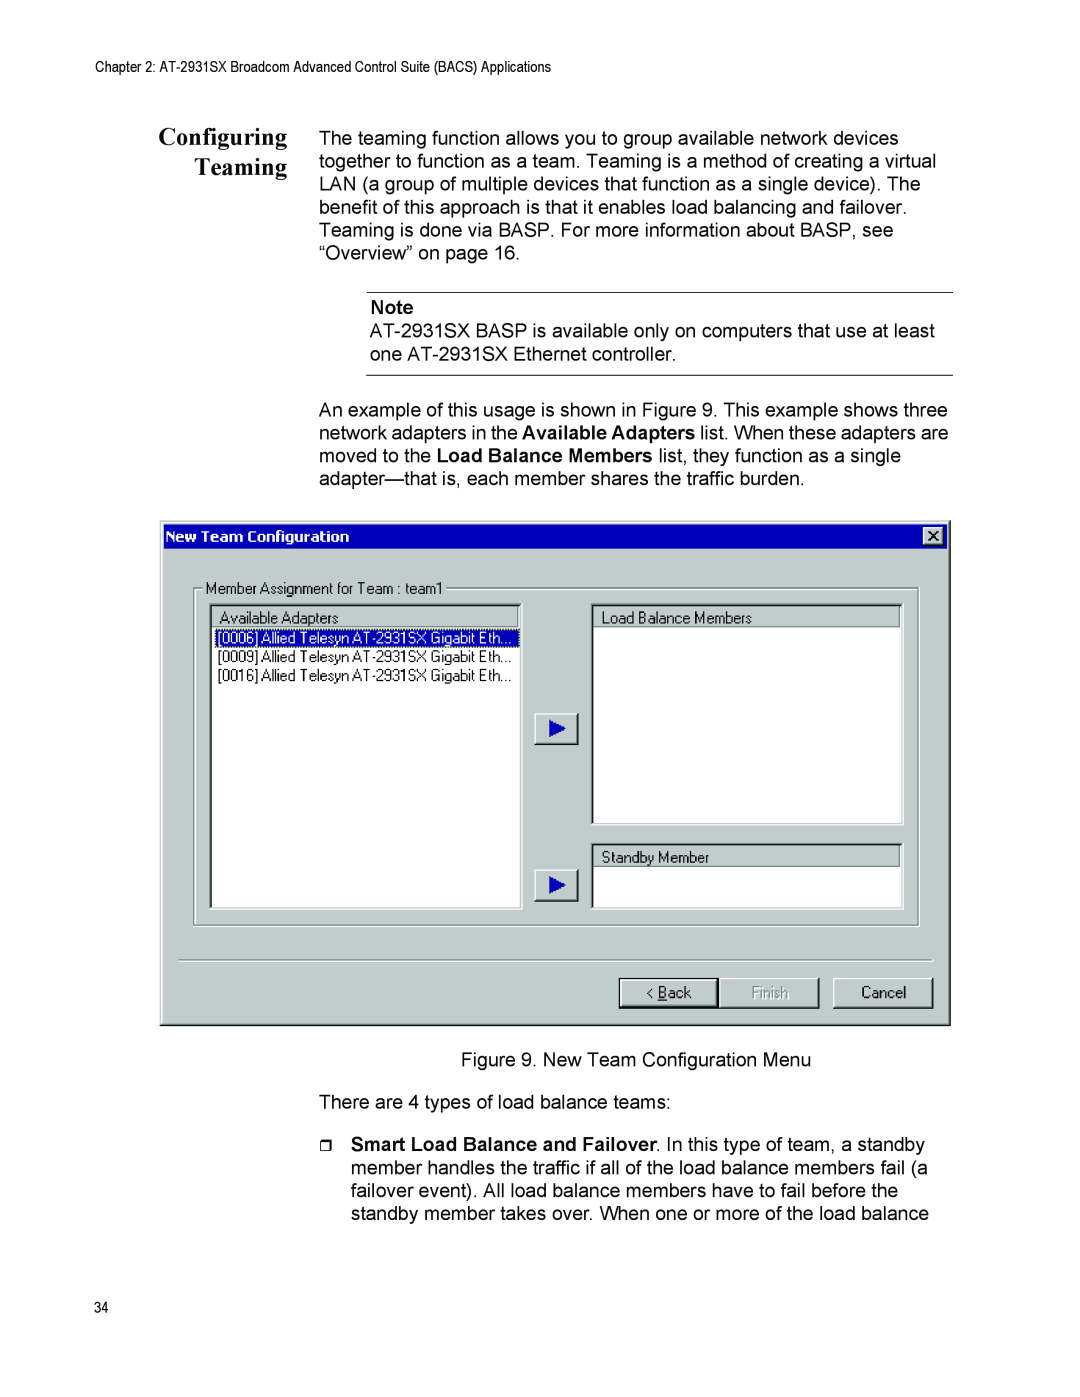 Allied Telesis AT-2931SX manual Configuring Teaming 